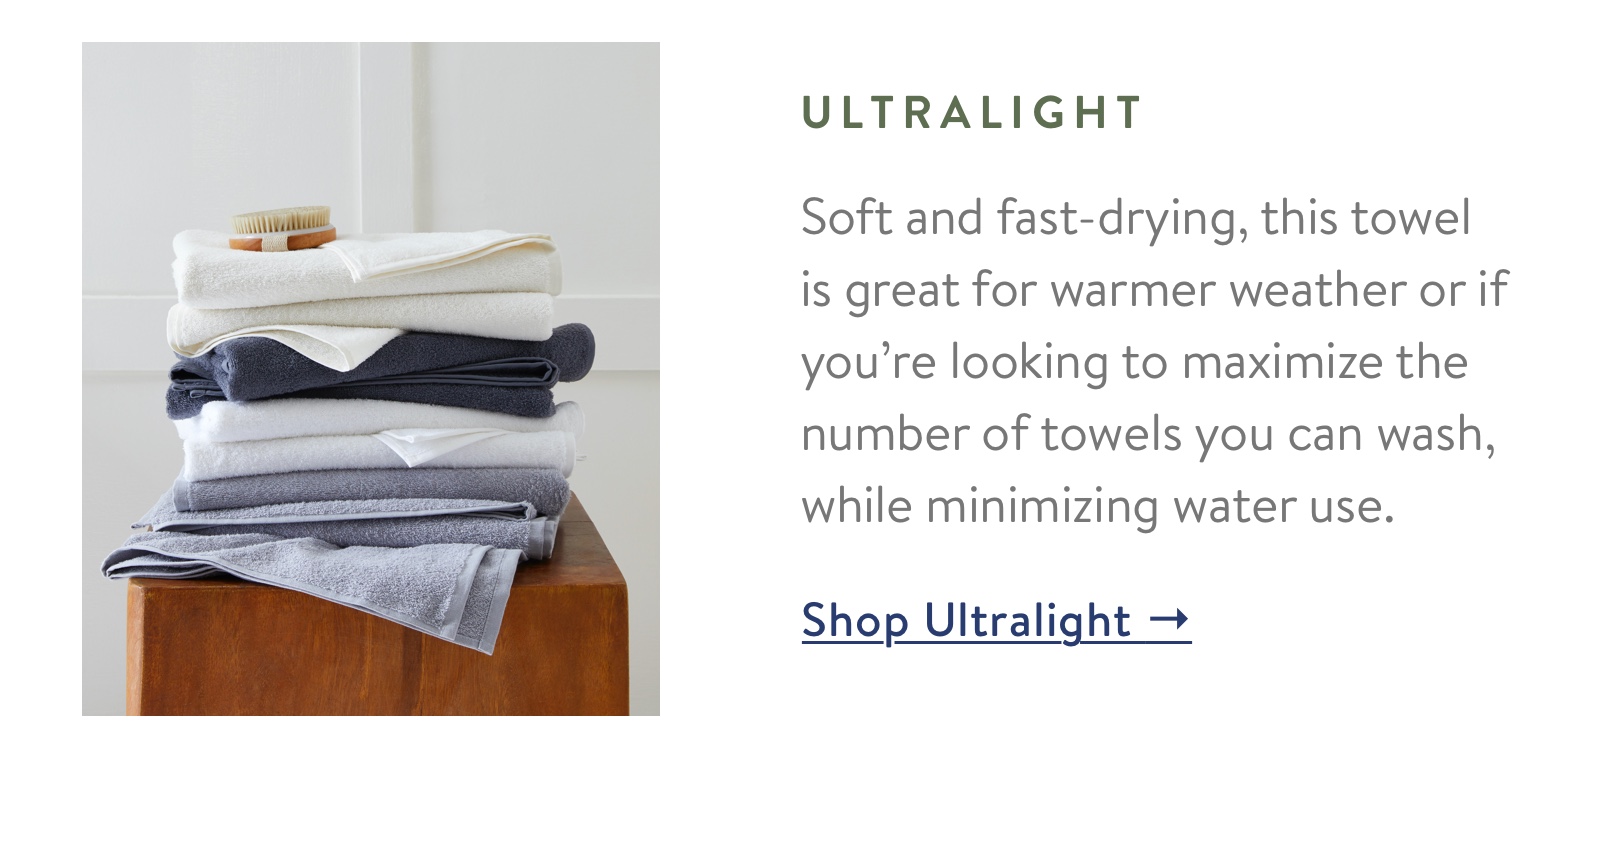 Soft and fast-drying, this towel is great for warmer weather or if you're looking to maximize the number of towels you can wash, while minimizing water use.